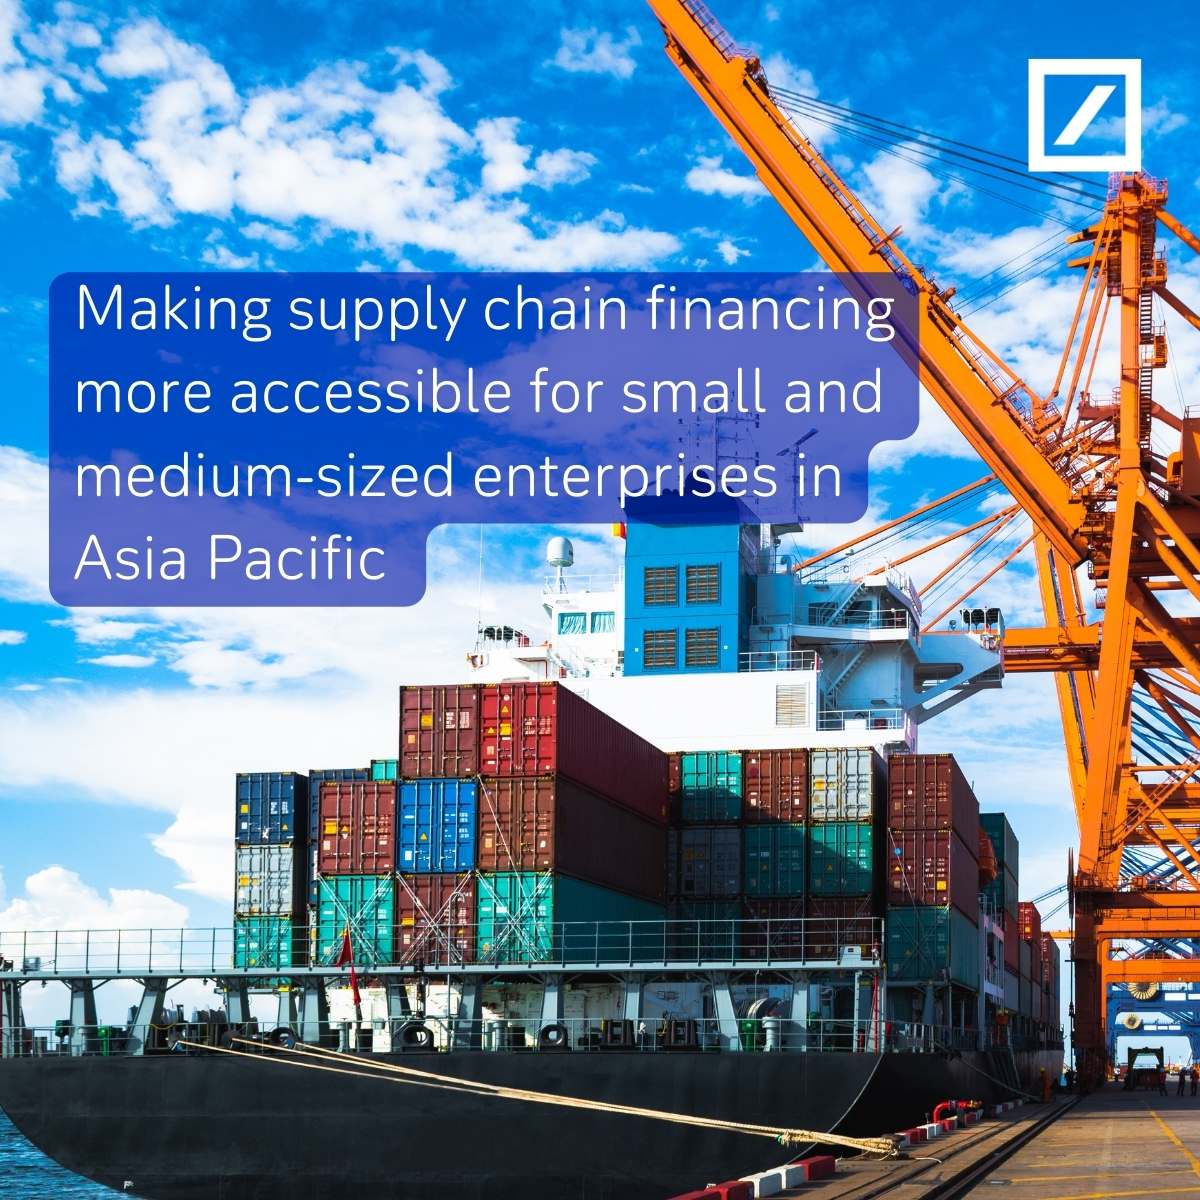 Deutsche Bank partners with the Asian Development Bank to make #SupplyChain financing accessible for #SMEs in Asia Pacific. Find out more here: adb.org/news/adb-deuts… @ADB_HQ